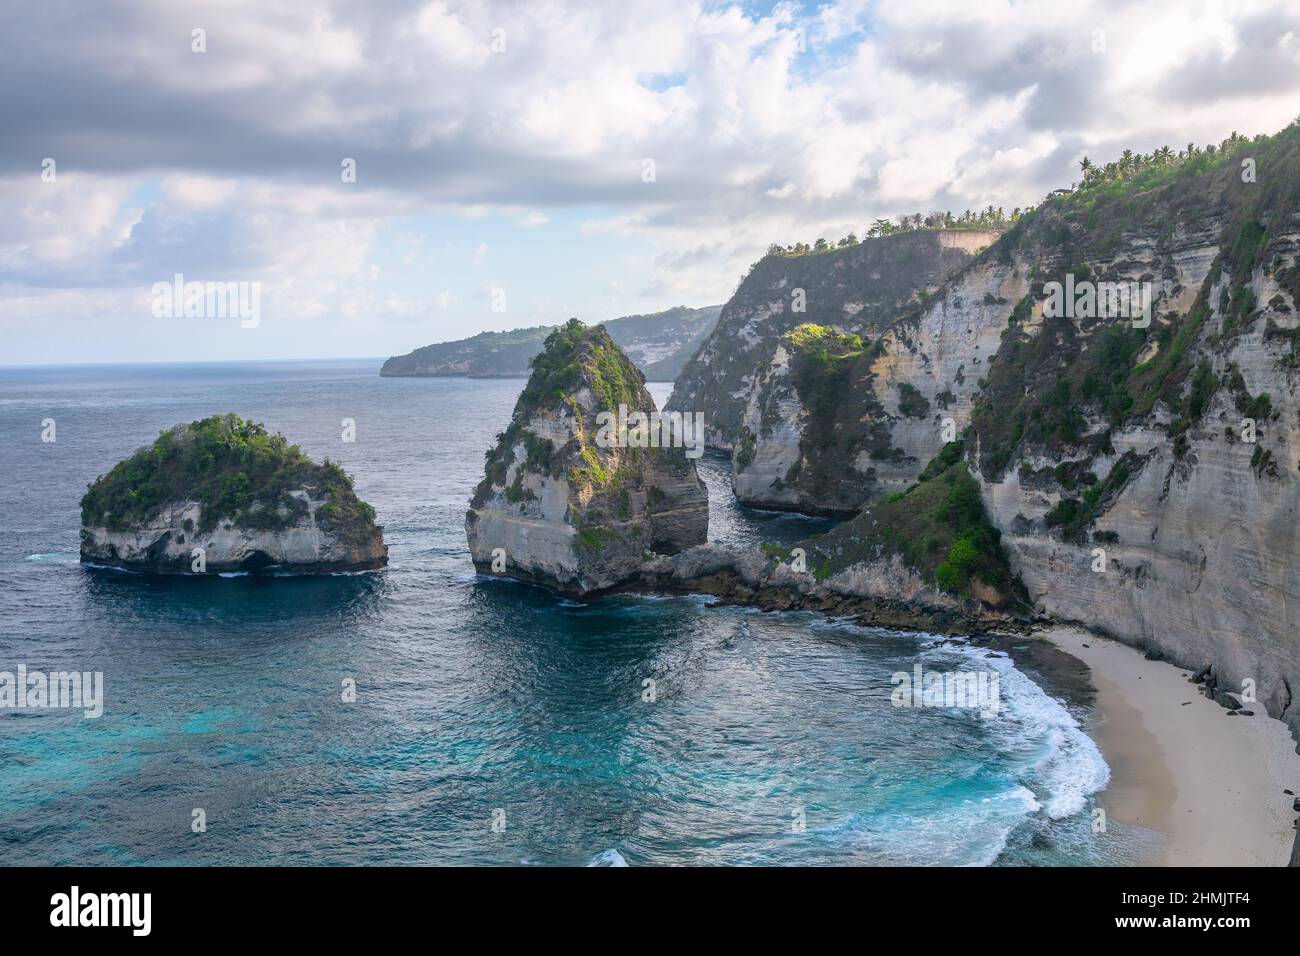 Scenery of sunny day with sand beach, turquoise ocean and mountains. View of Diamond beach, Nusa Penida, Bali island, Indonesia. Wallpaper background. Stock Photo